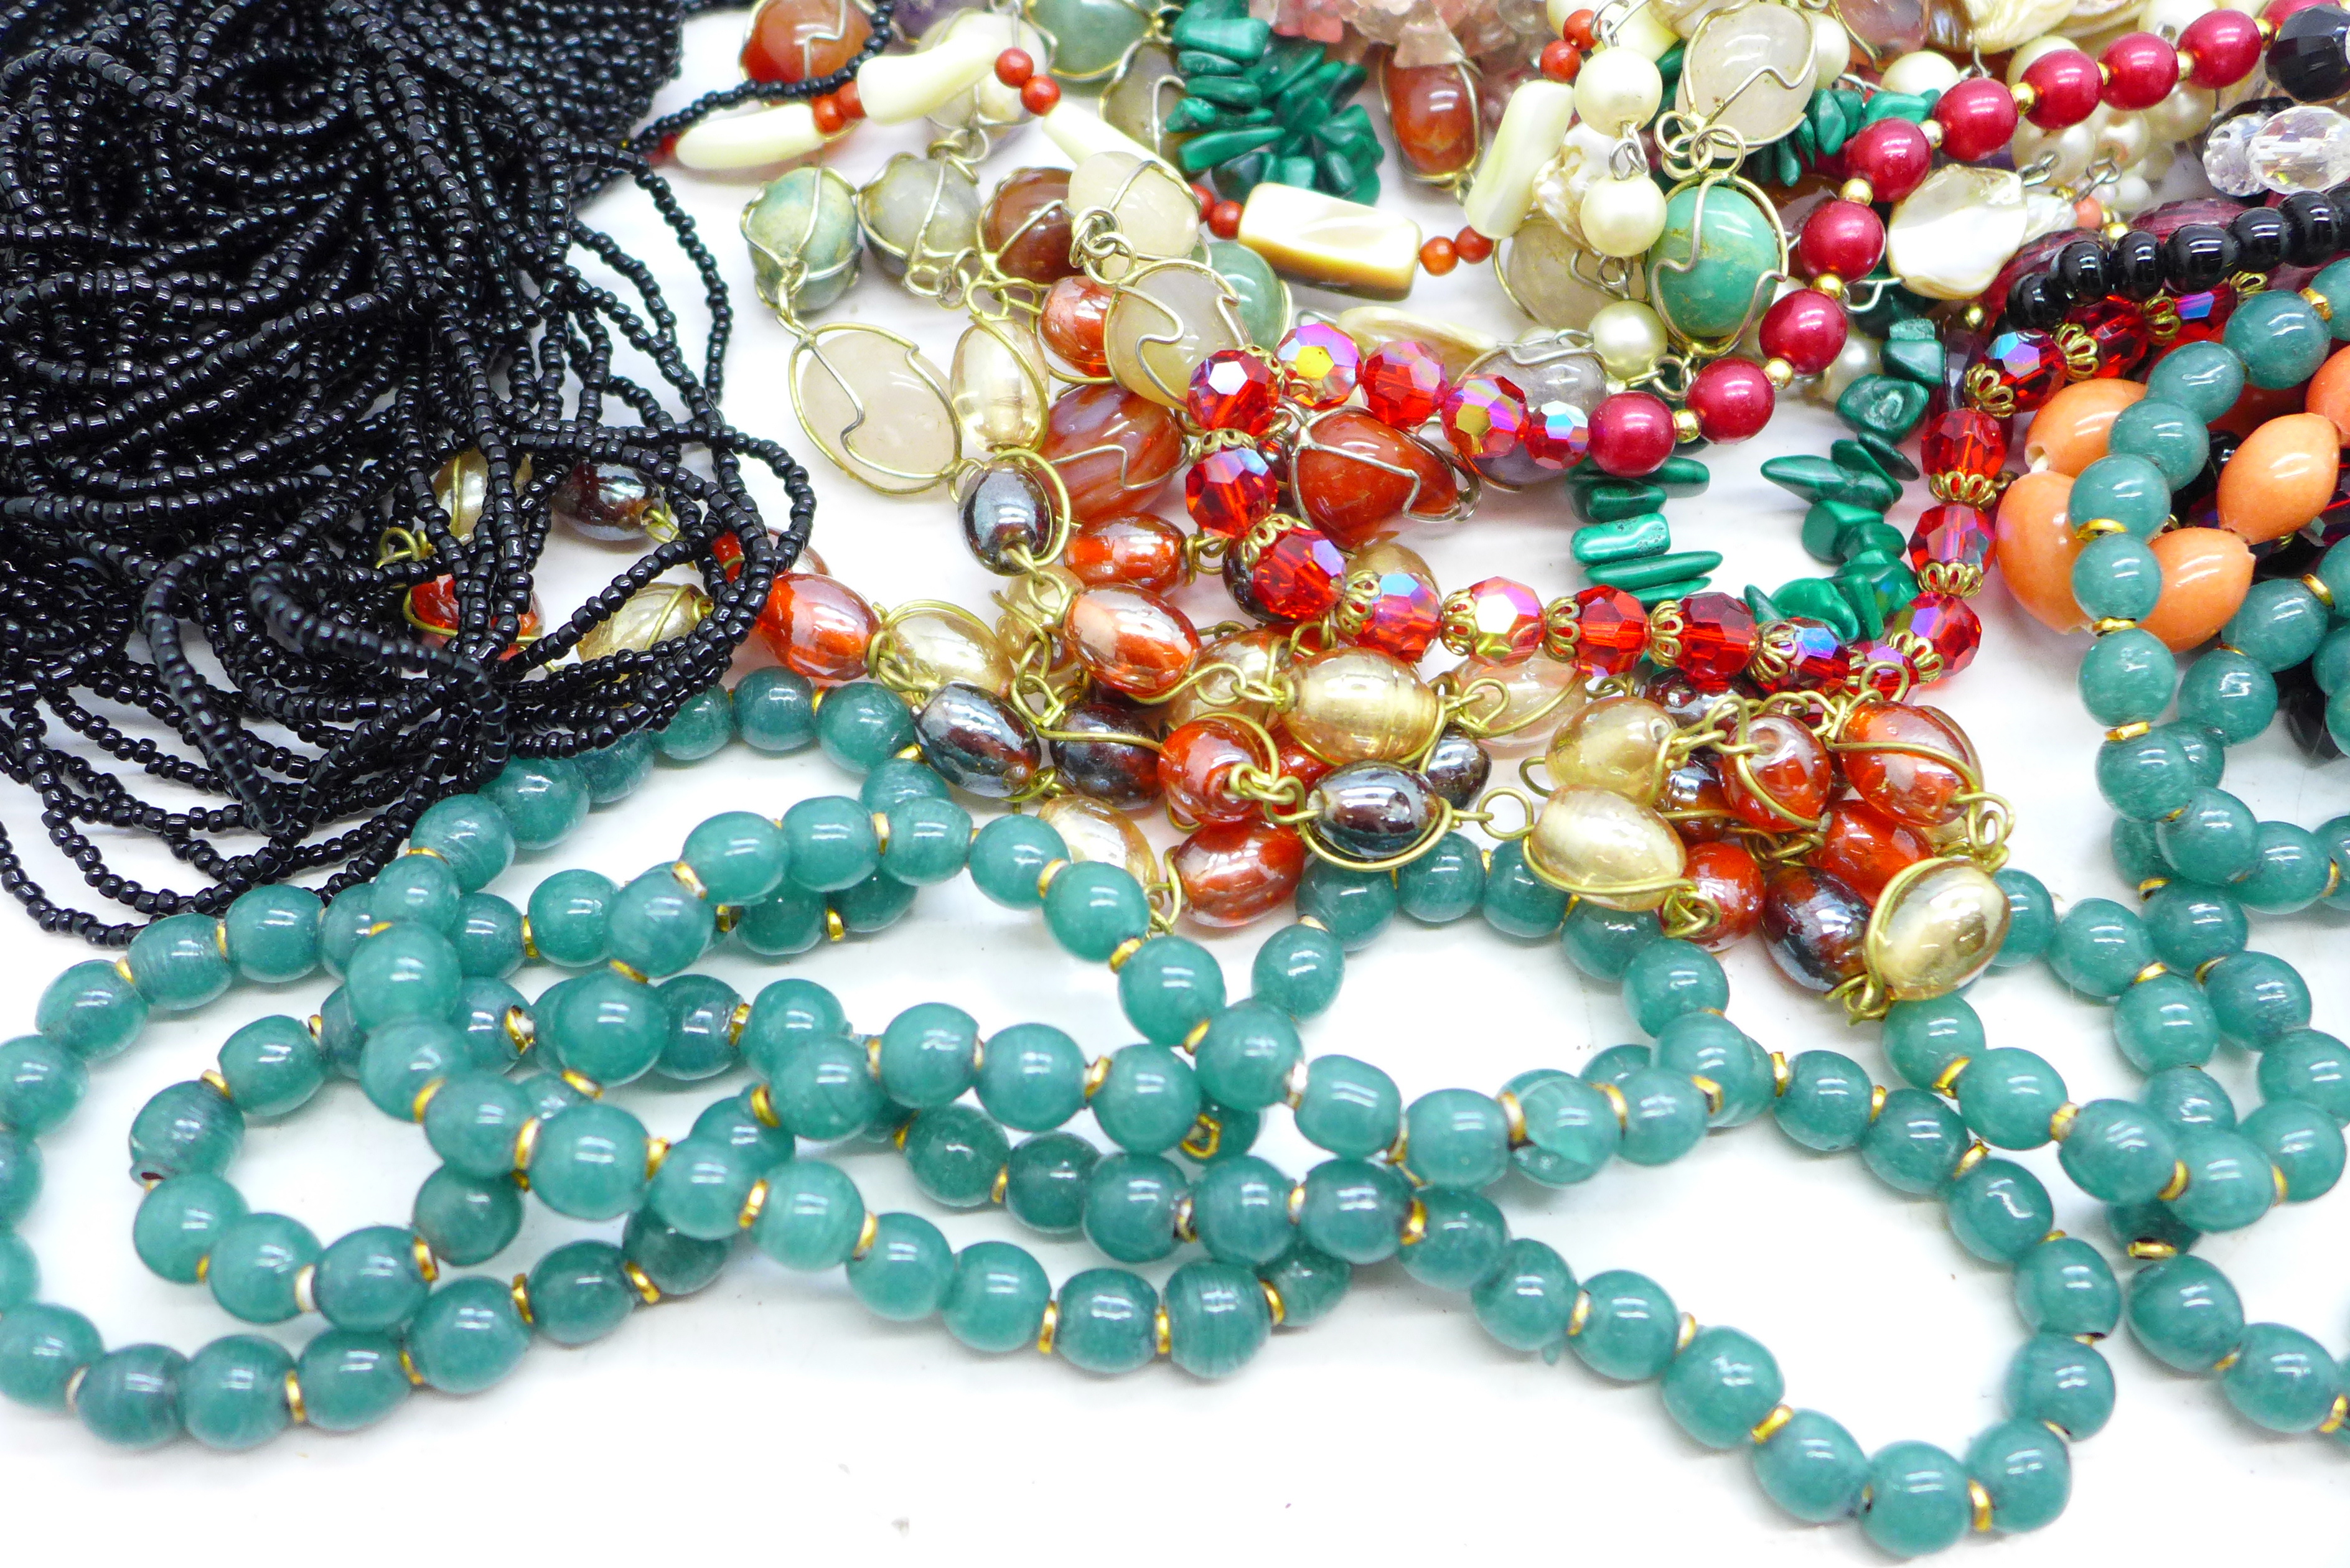 Gemstone and glass bead necklaces - Image 3 of 4